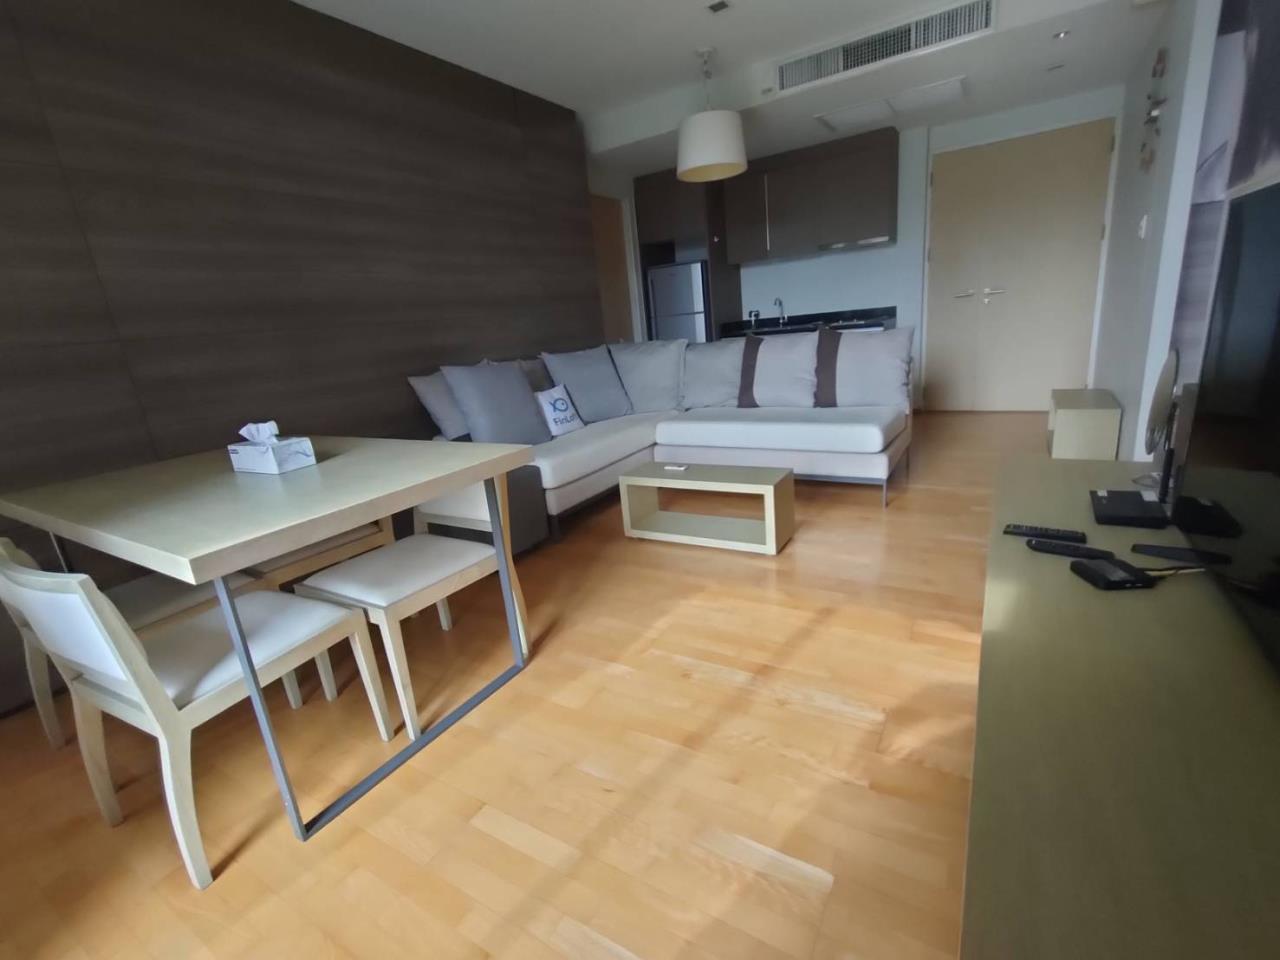 Bestbkkcondos Agency's 2Bedrooms | 2Bathrooms | 80sqm | Issara@42 | Rent 35,000 THB / Month Negotiable 5